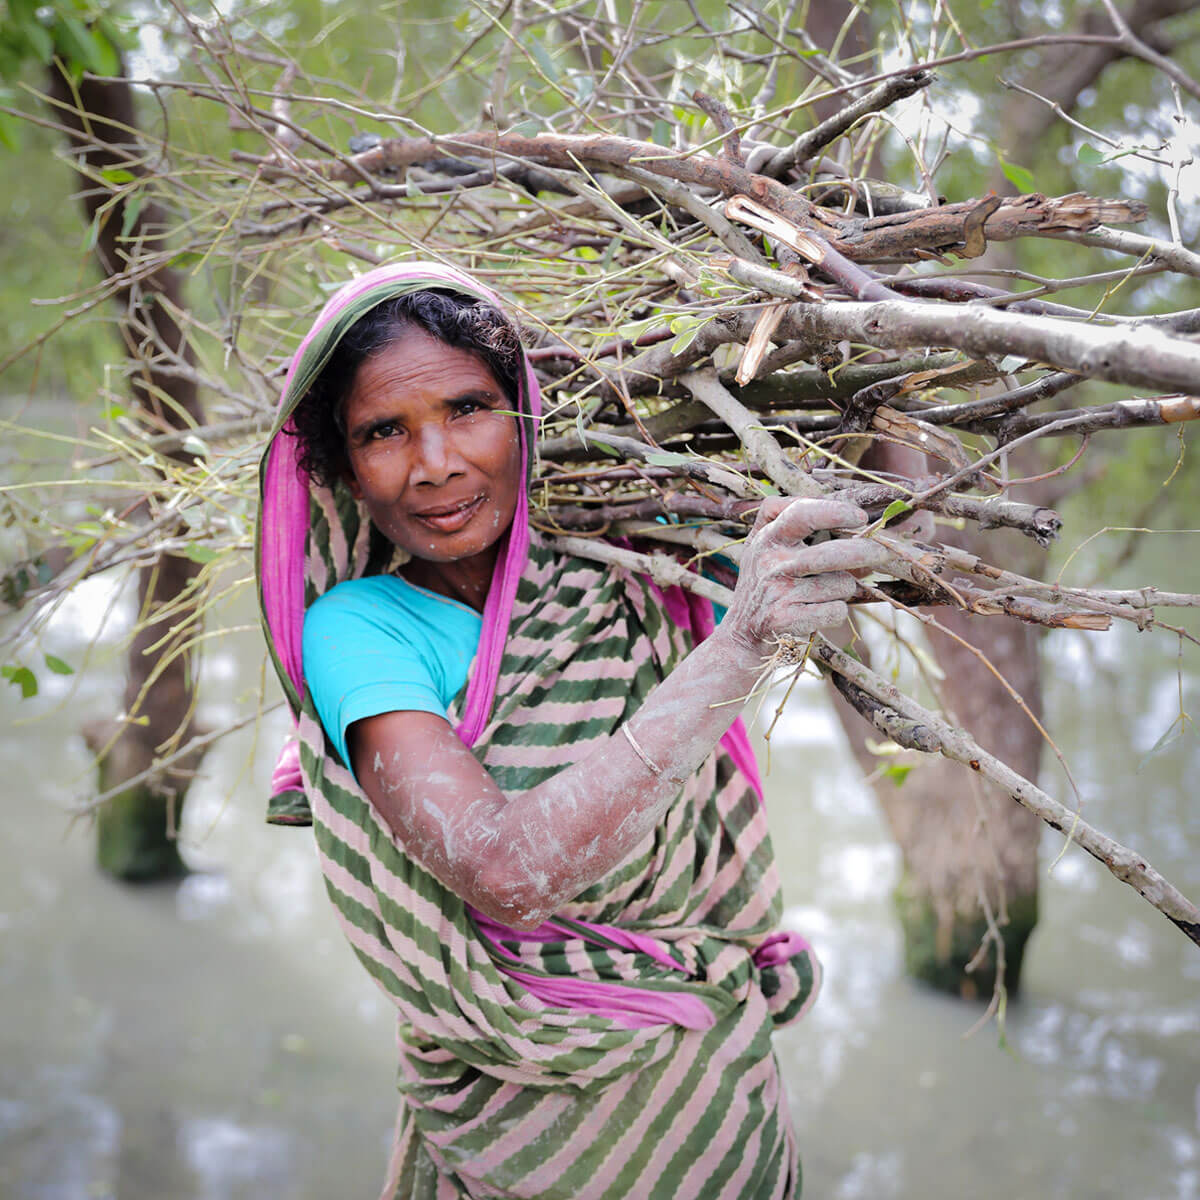 A woman with a bundle of sticks on her shoulder